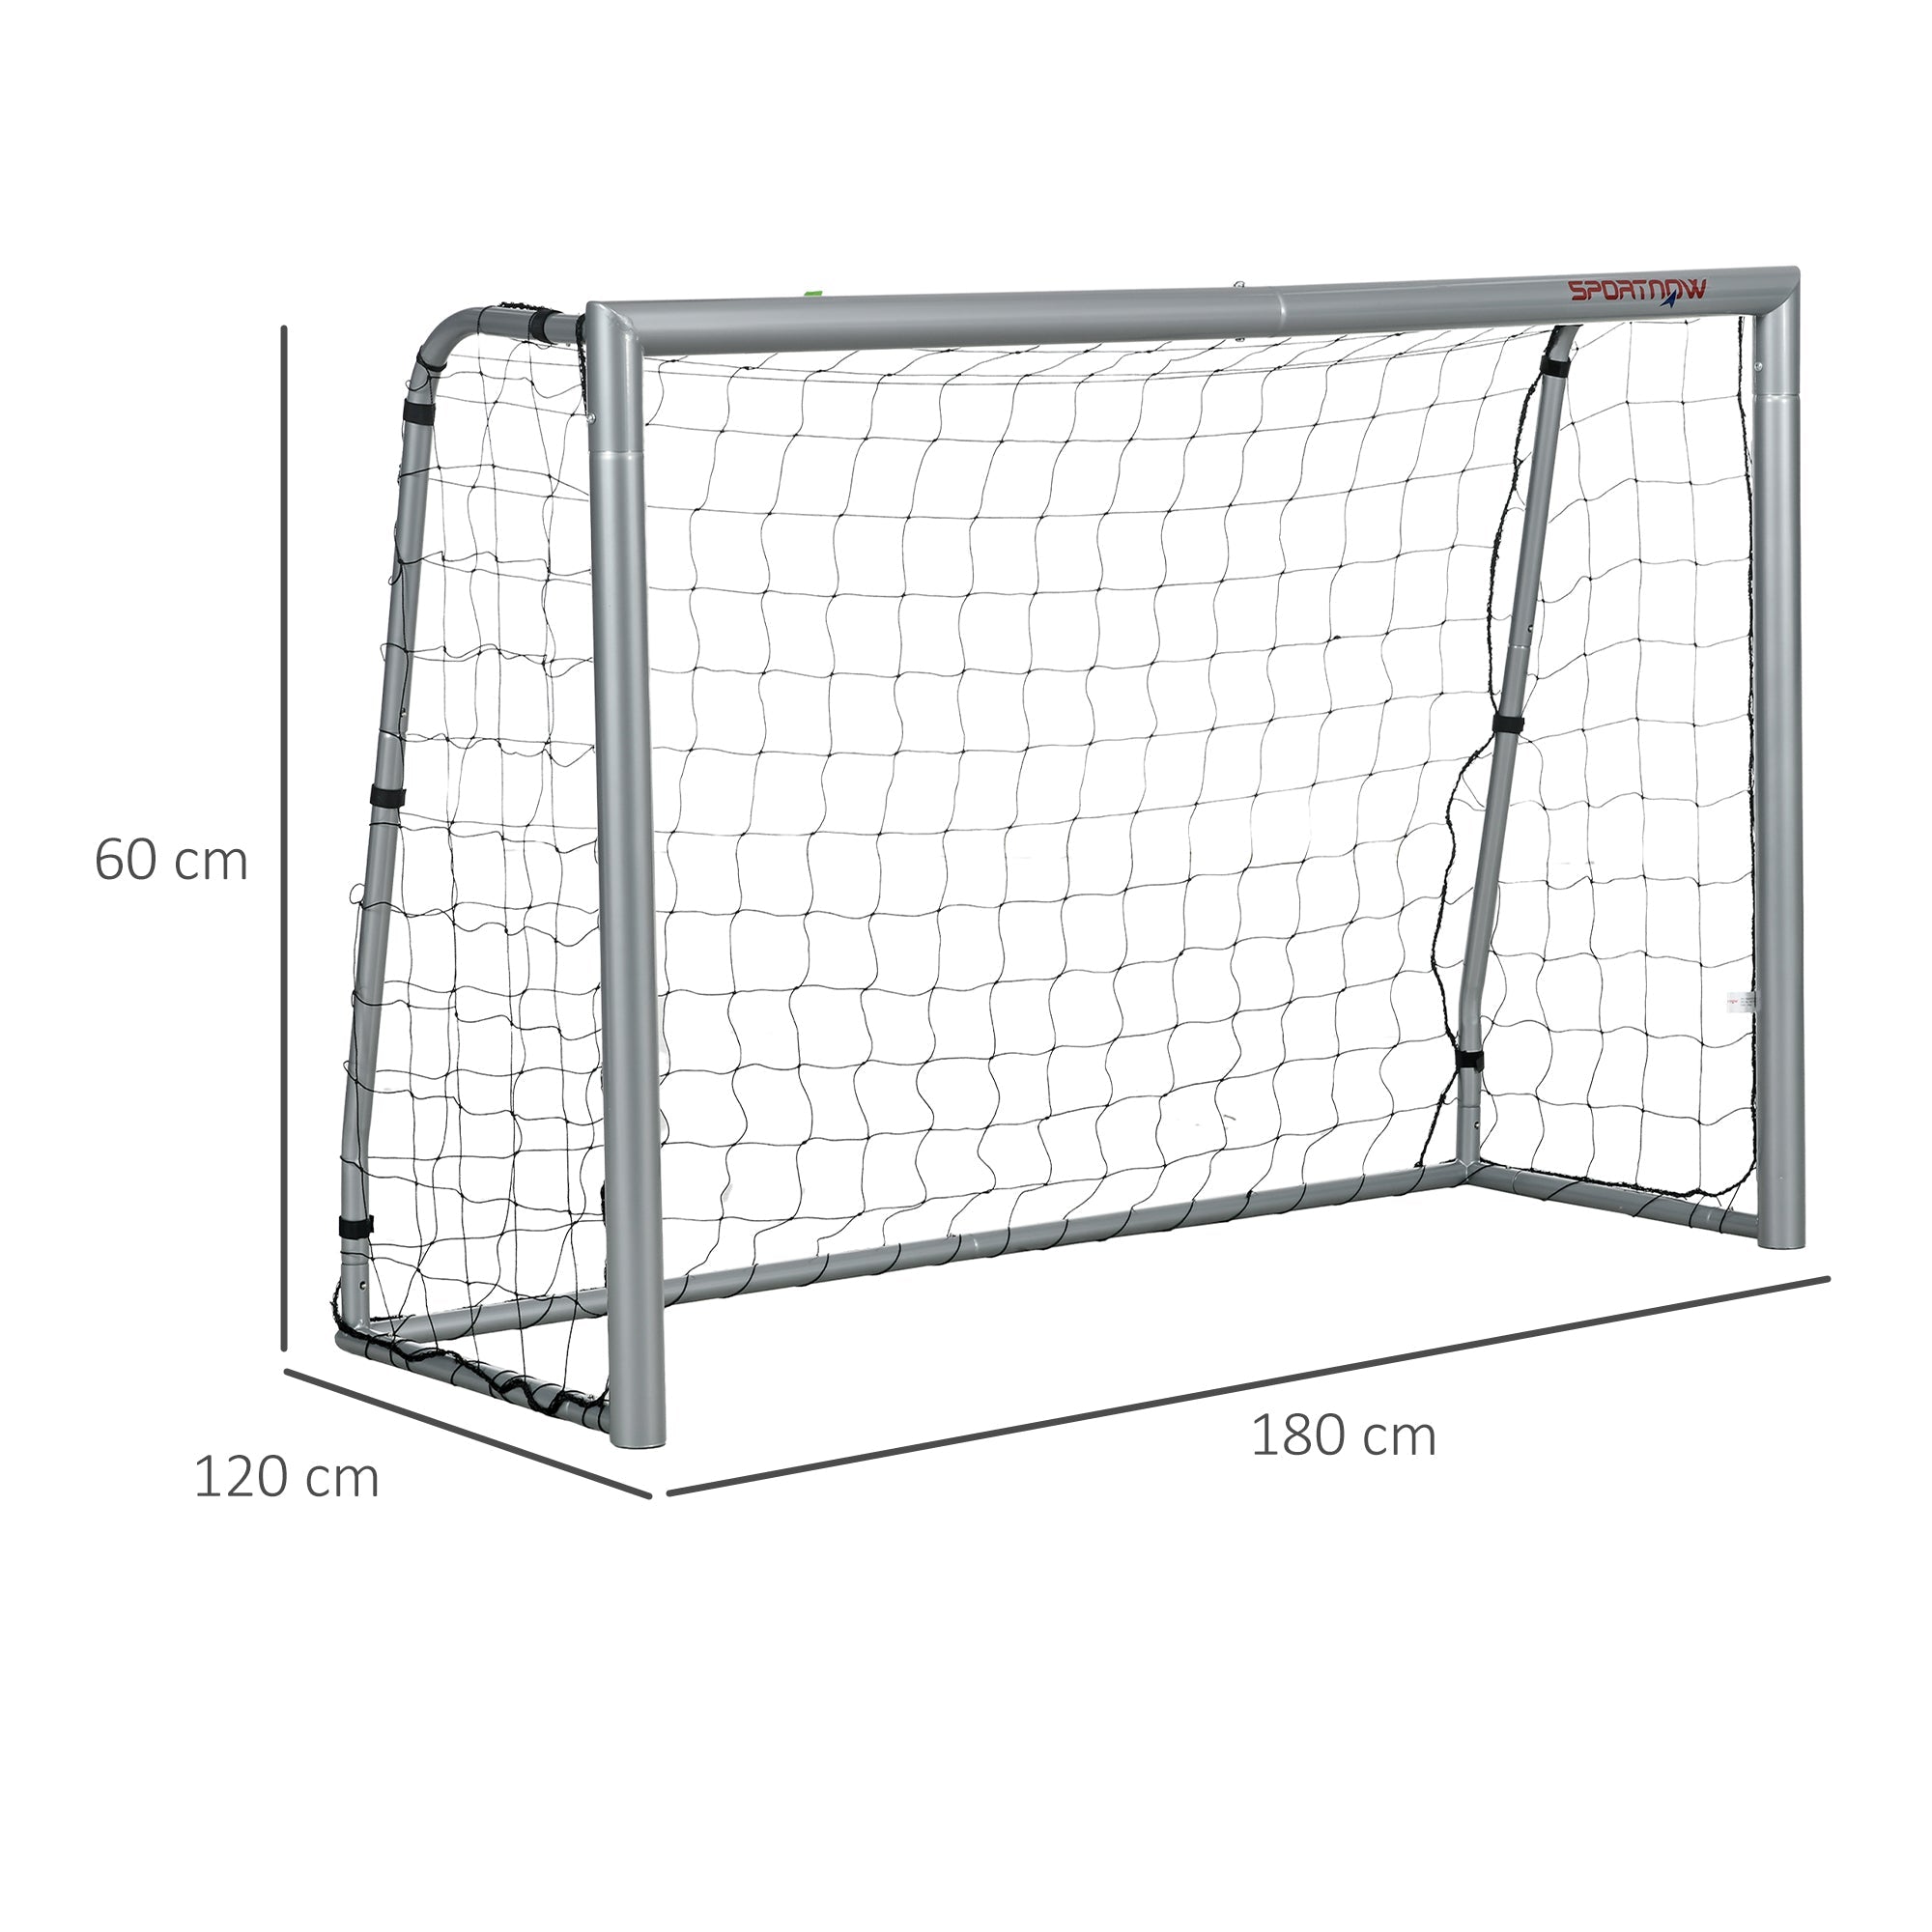 6ft x 2ft Football Goal, Football Net for Garden with Ground Stakes, Quick and Simple Set Up-2